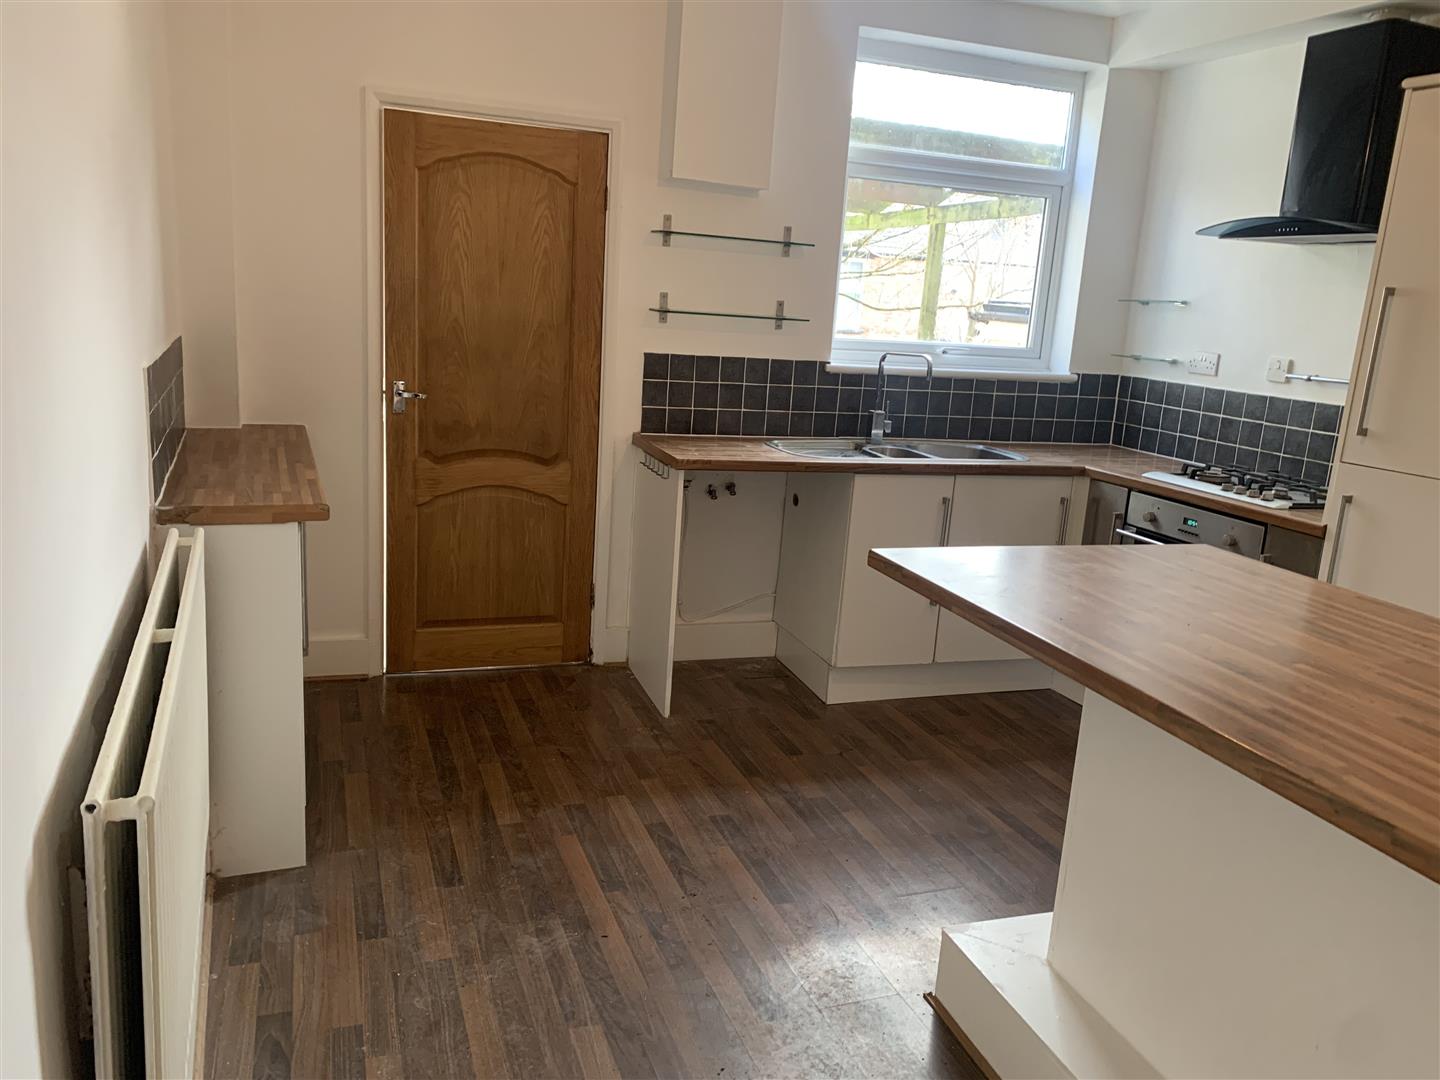 2 bed  for sale in Nottingham  - Property Image 4